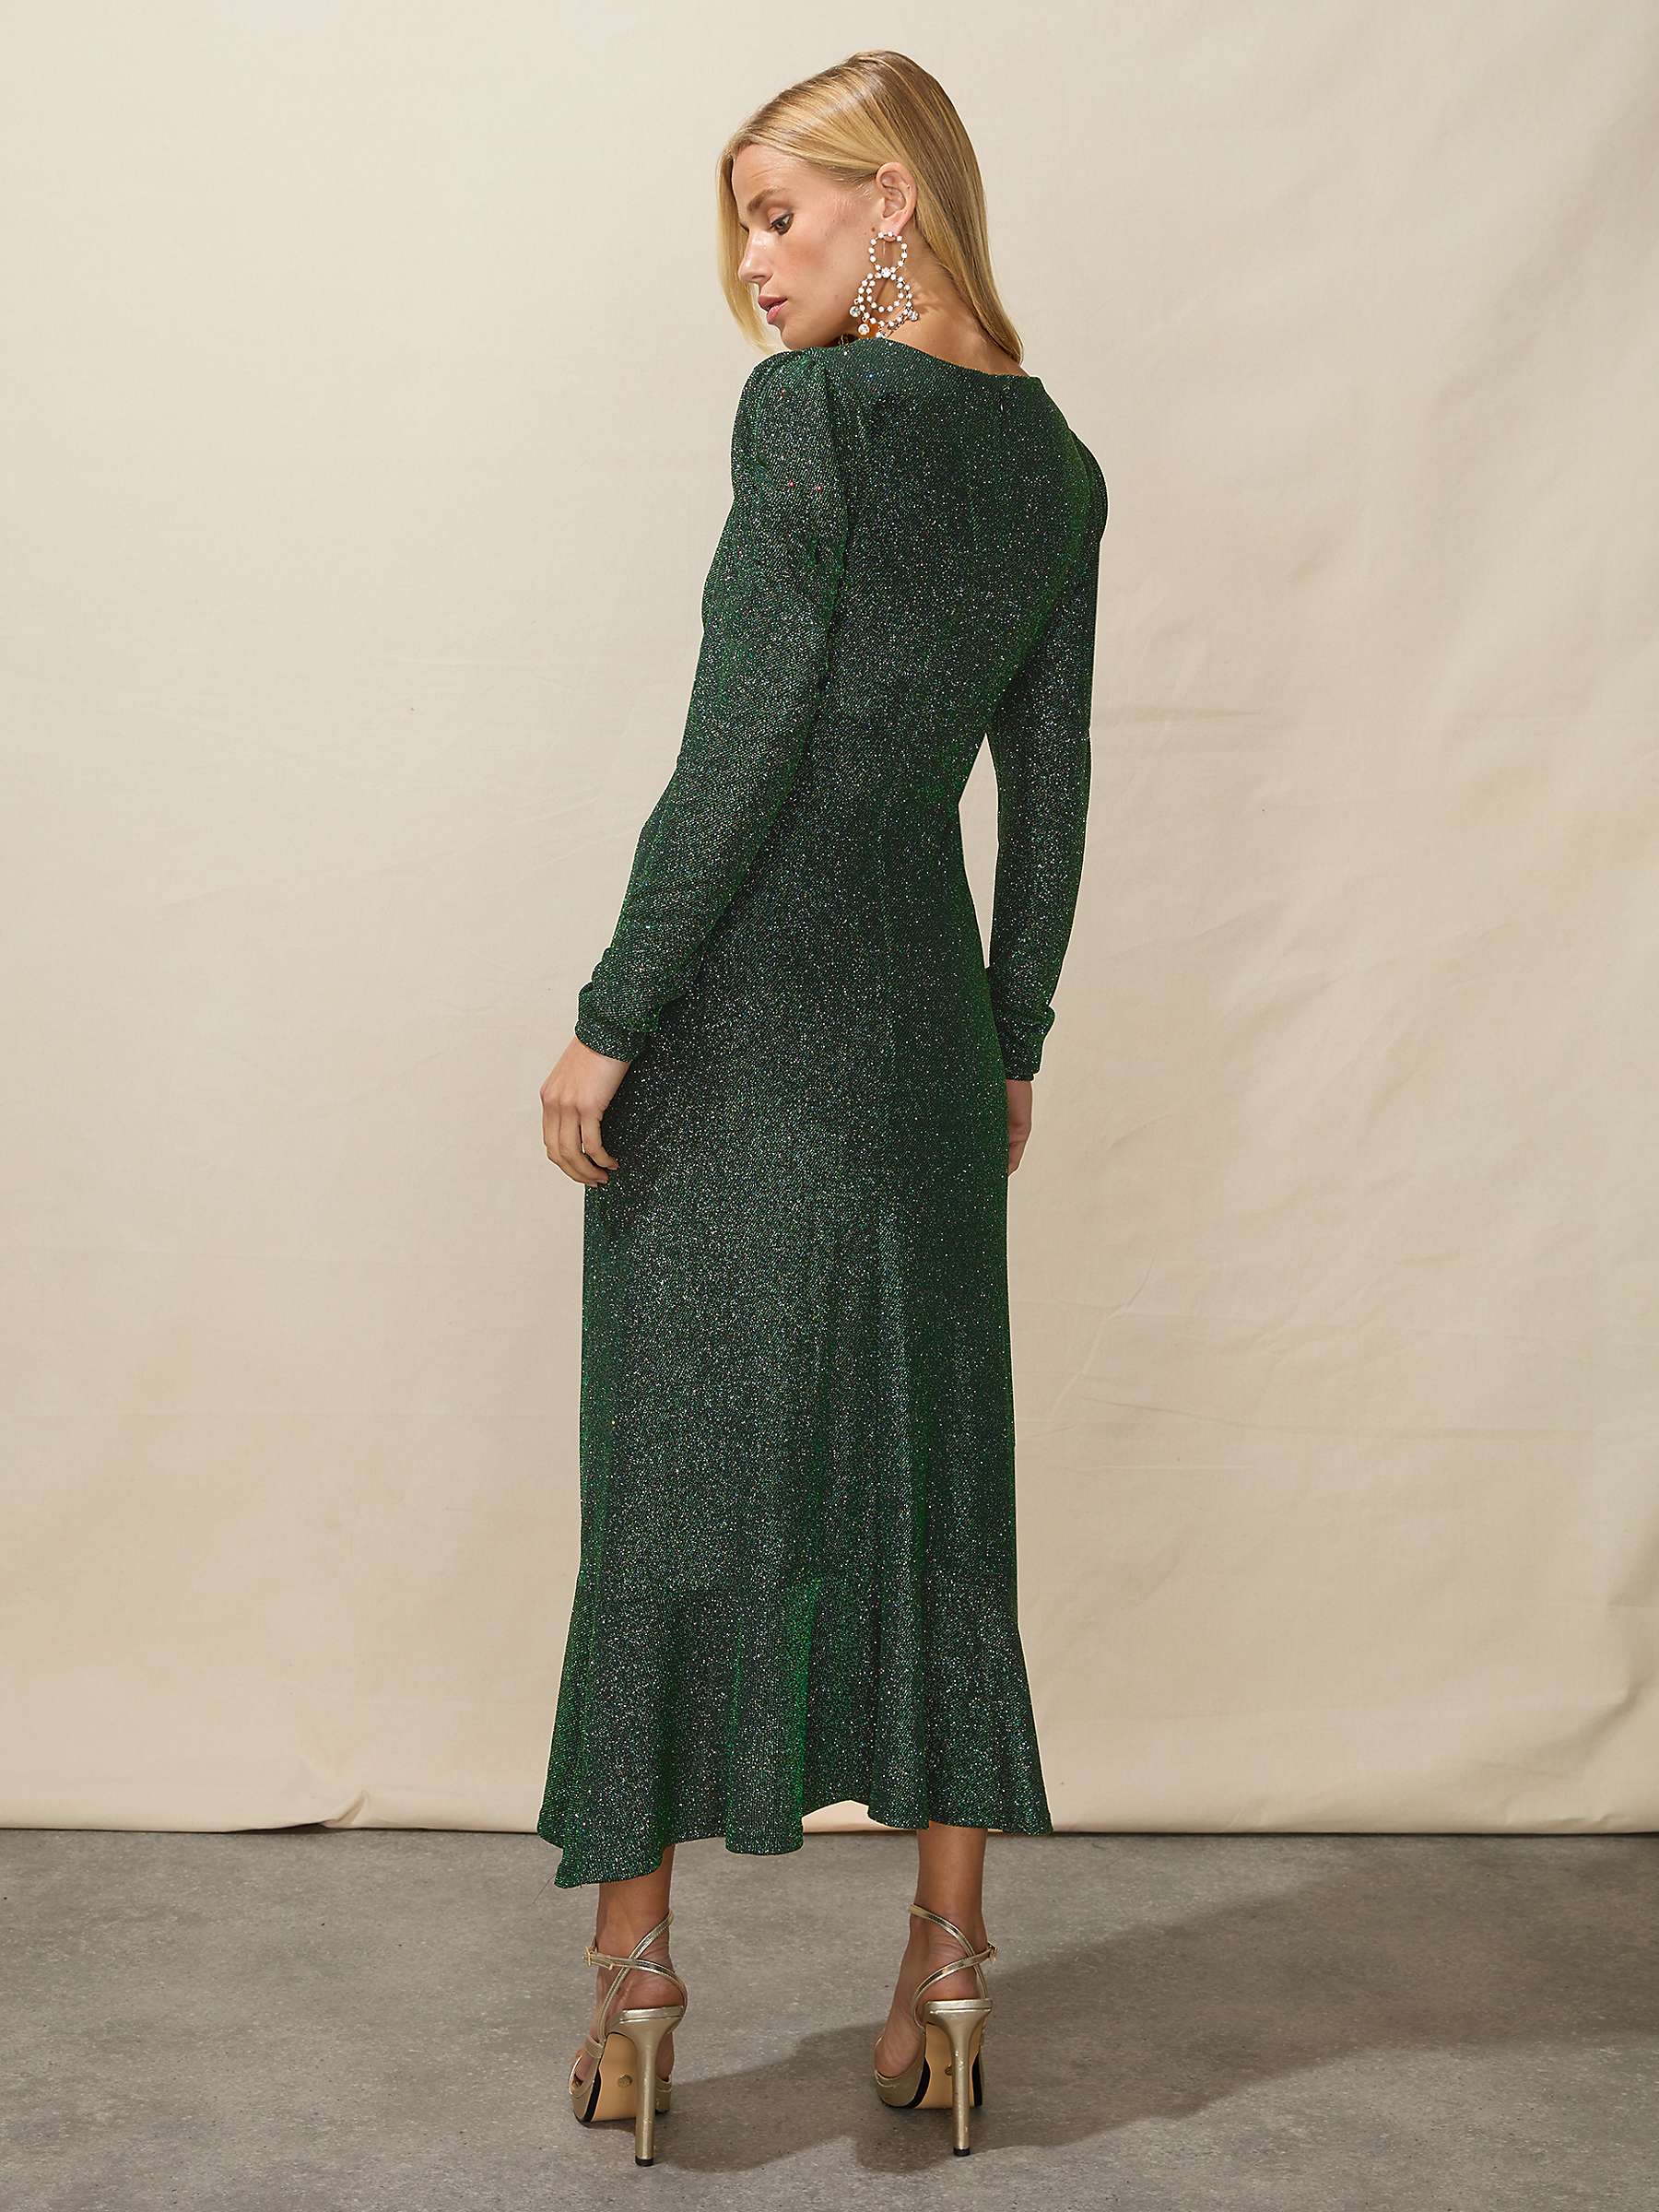 Buy Ro&Zo Super Sparkle Ruch Front Dress, Green Online at johnlewis.com